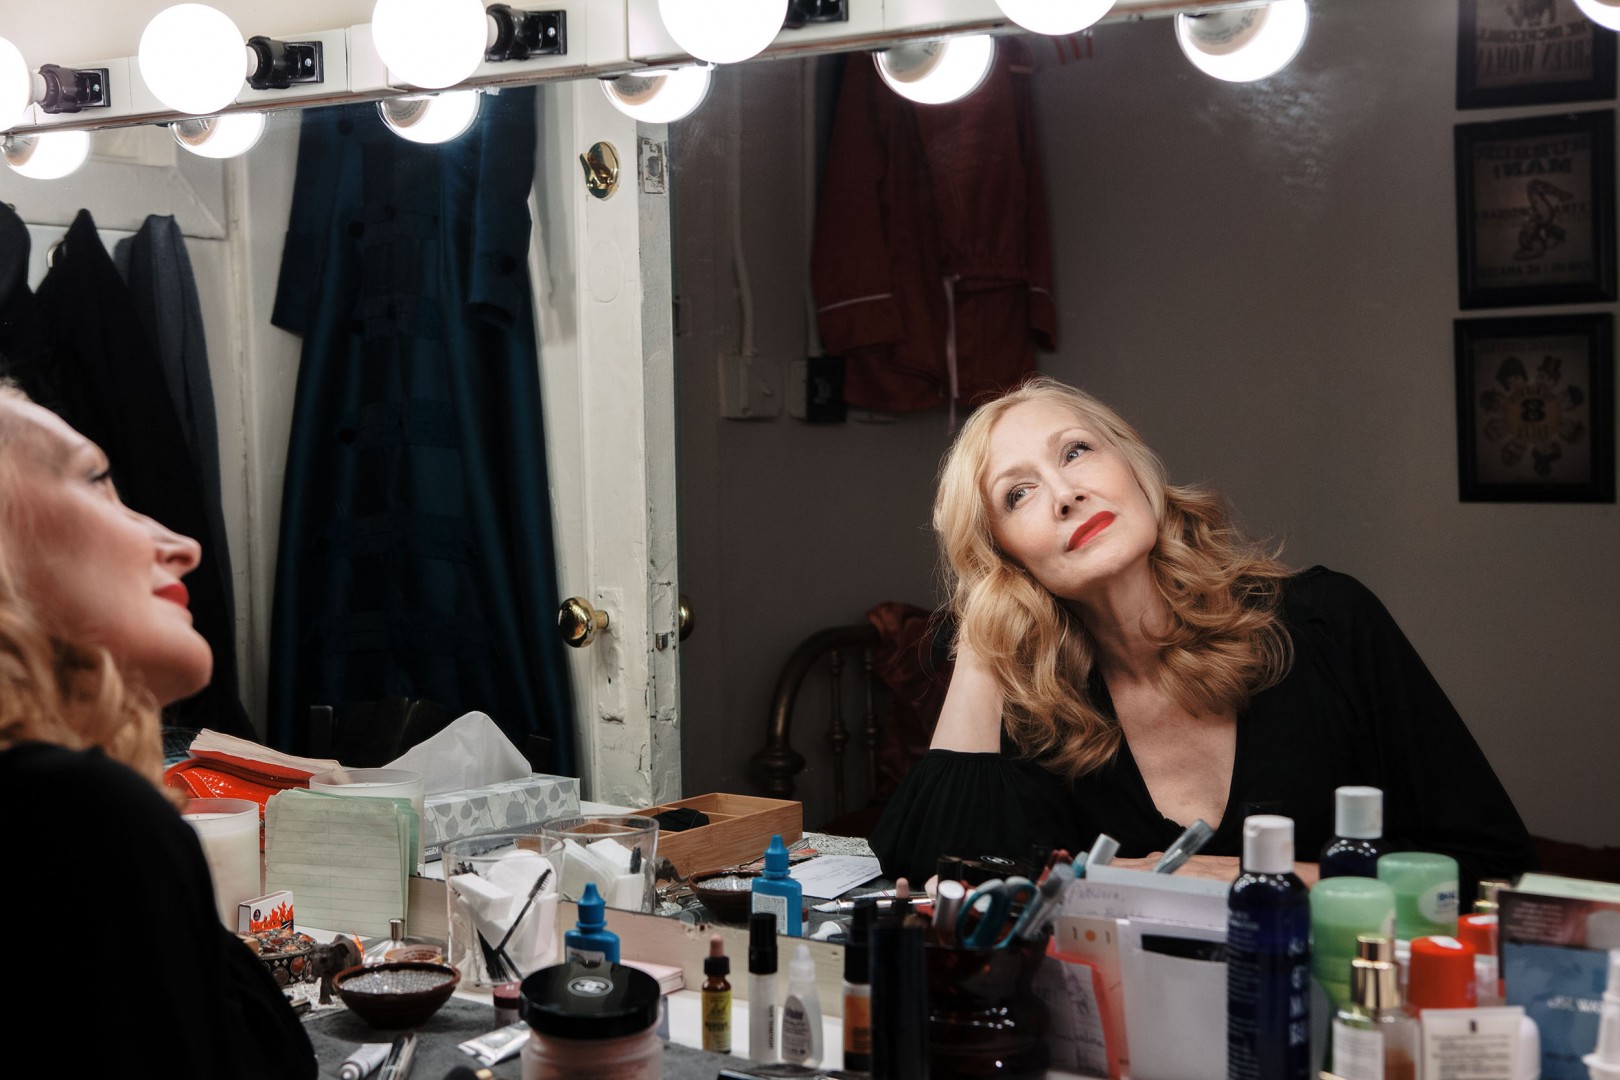 A portrait of Patricia Clarkson, who is staring in the mirror.